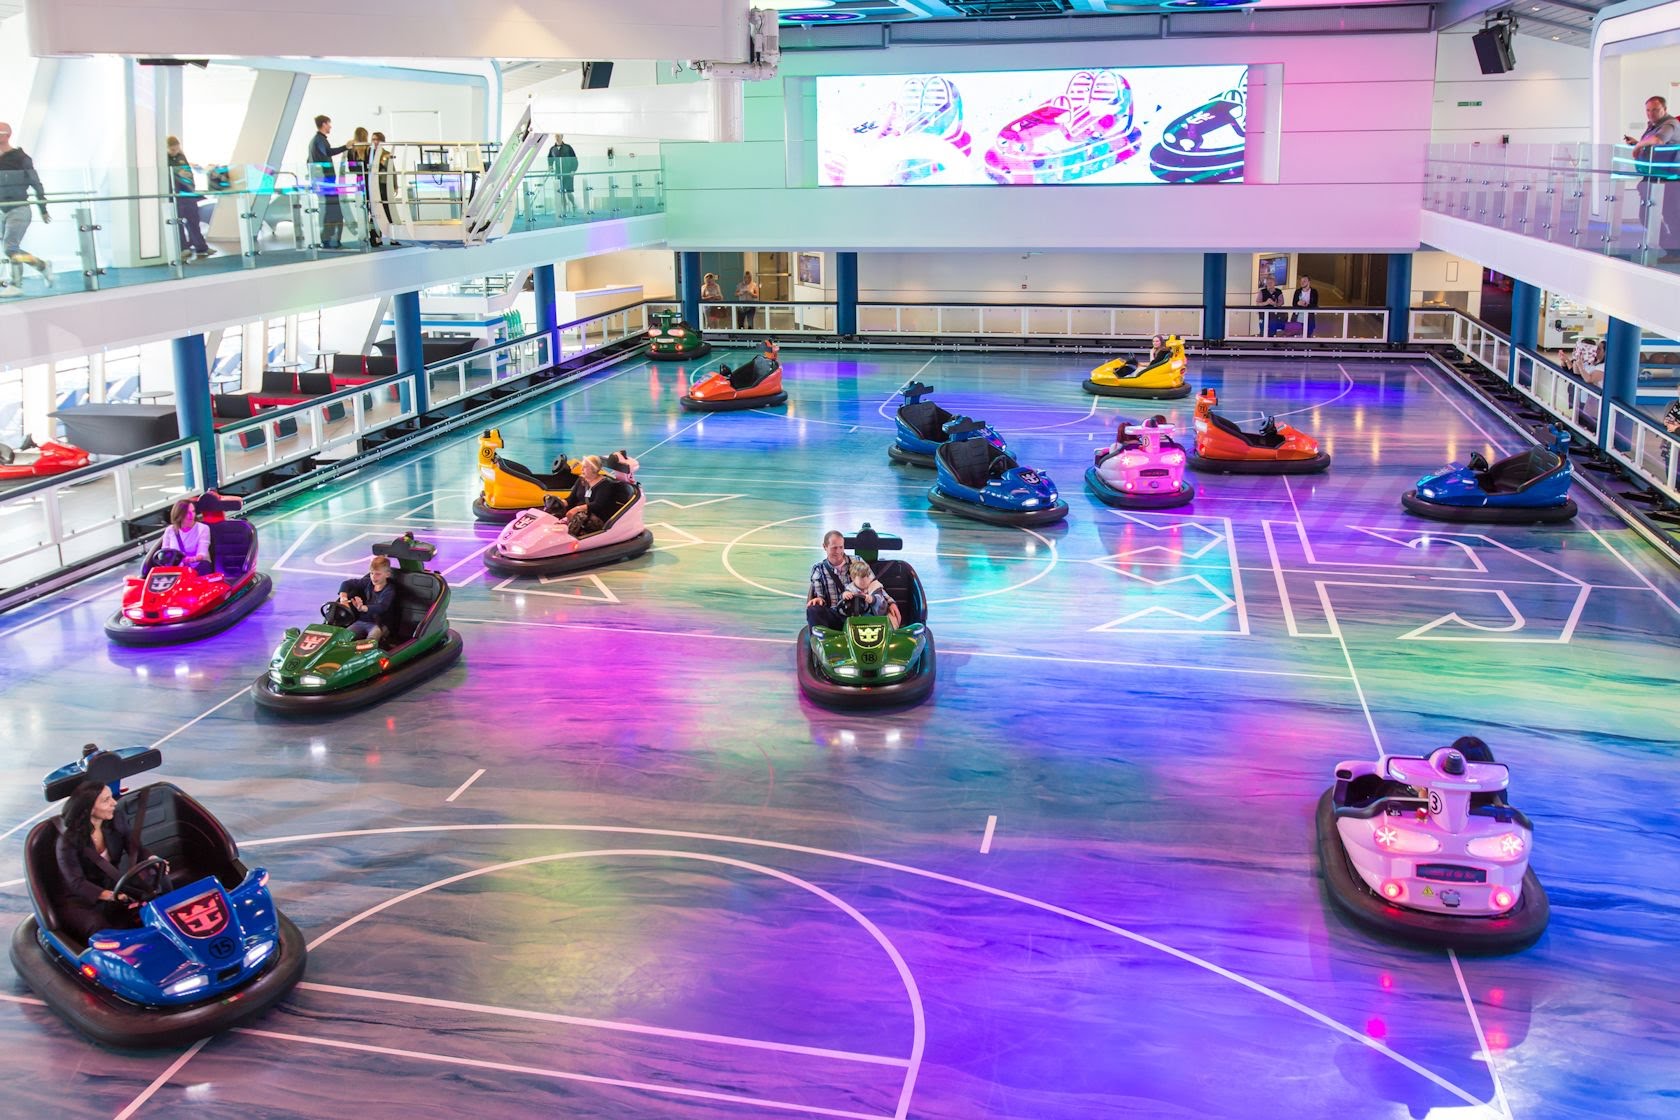 Finding Indoor Bumper Cars For Family Entertainment Centers